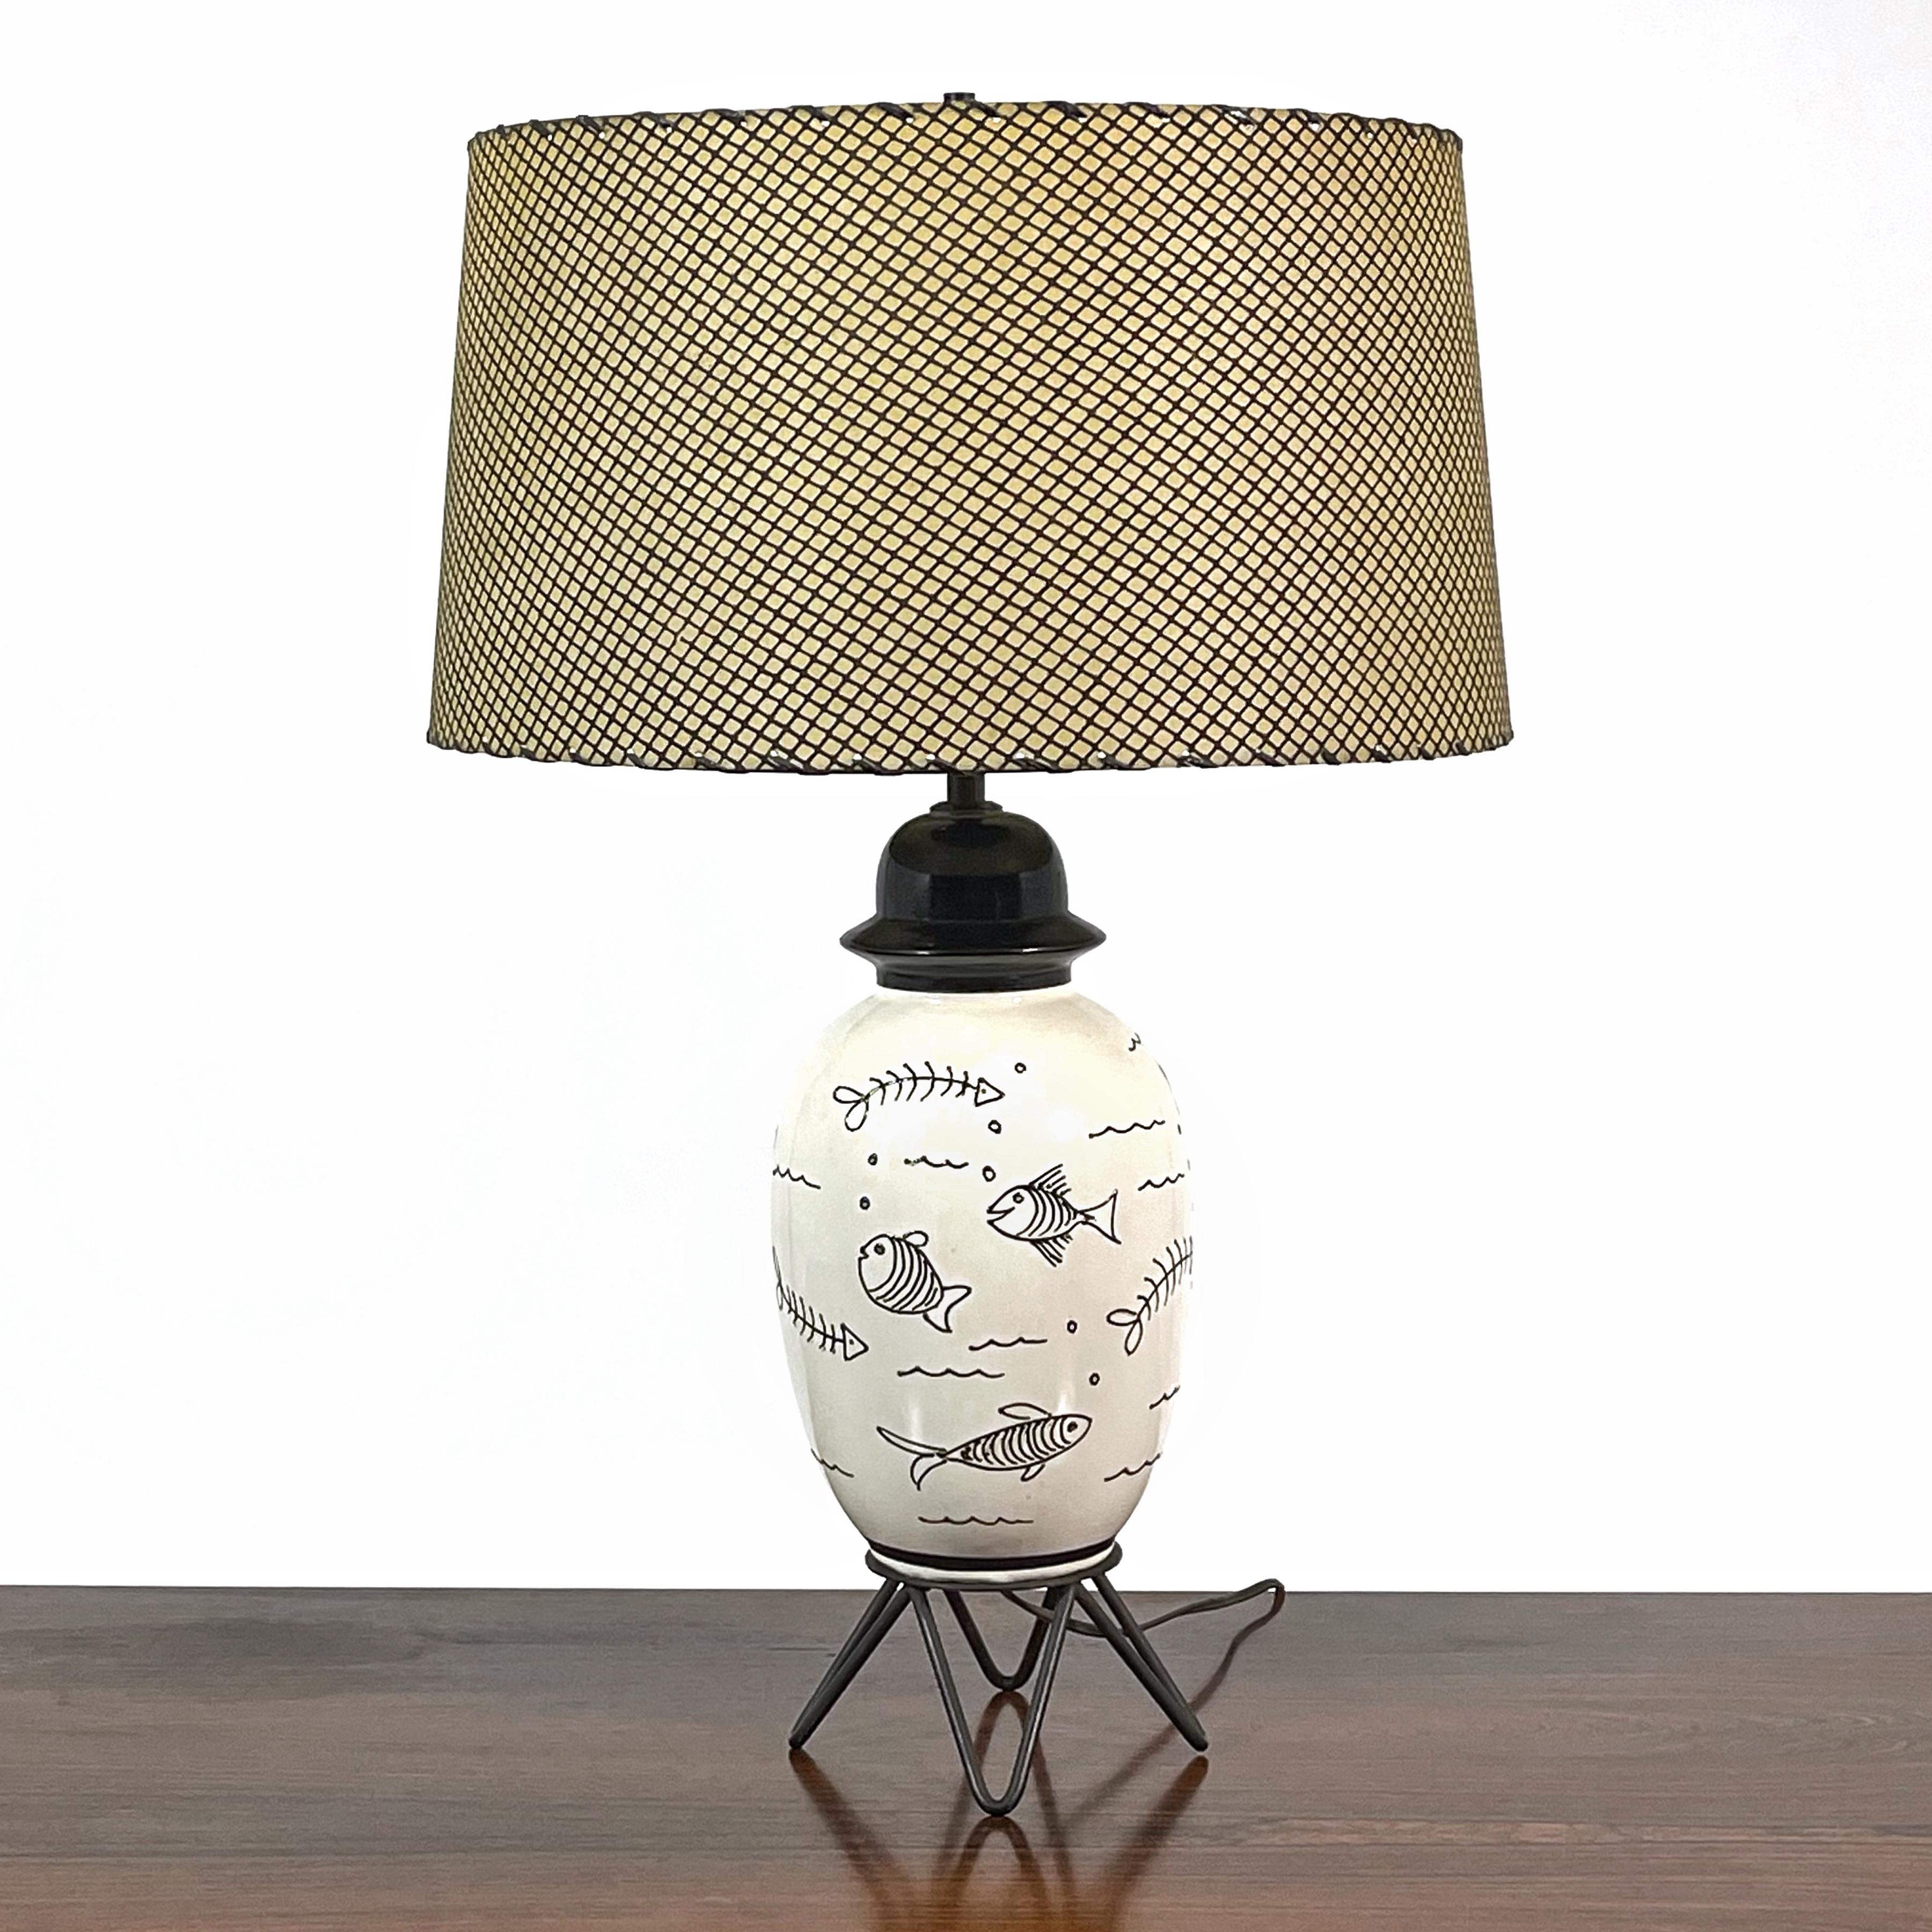 1950s Table Lamp with Whimsical Fish Design For Sale 4